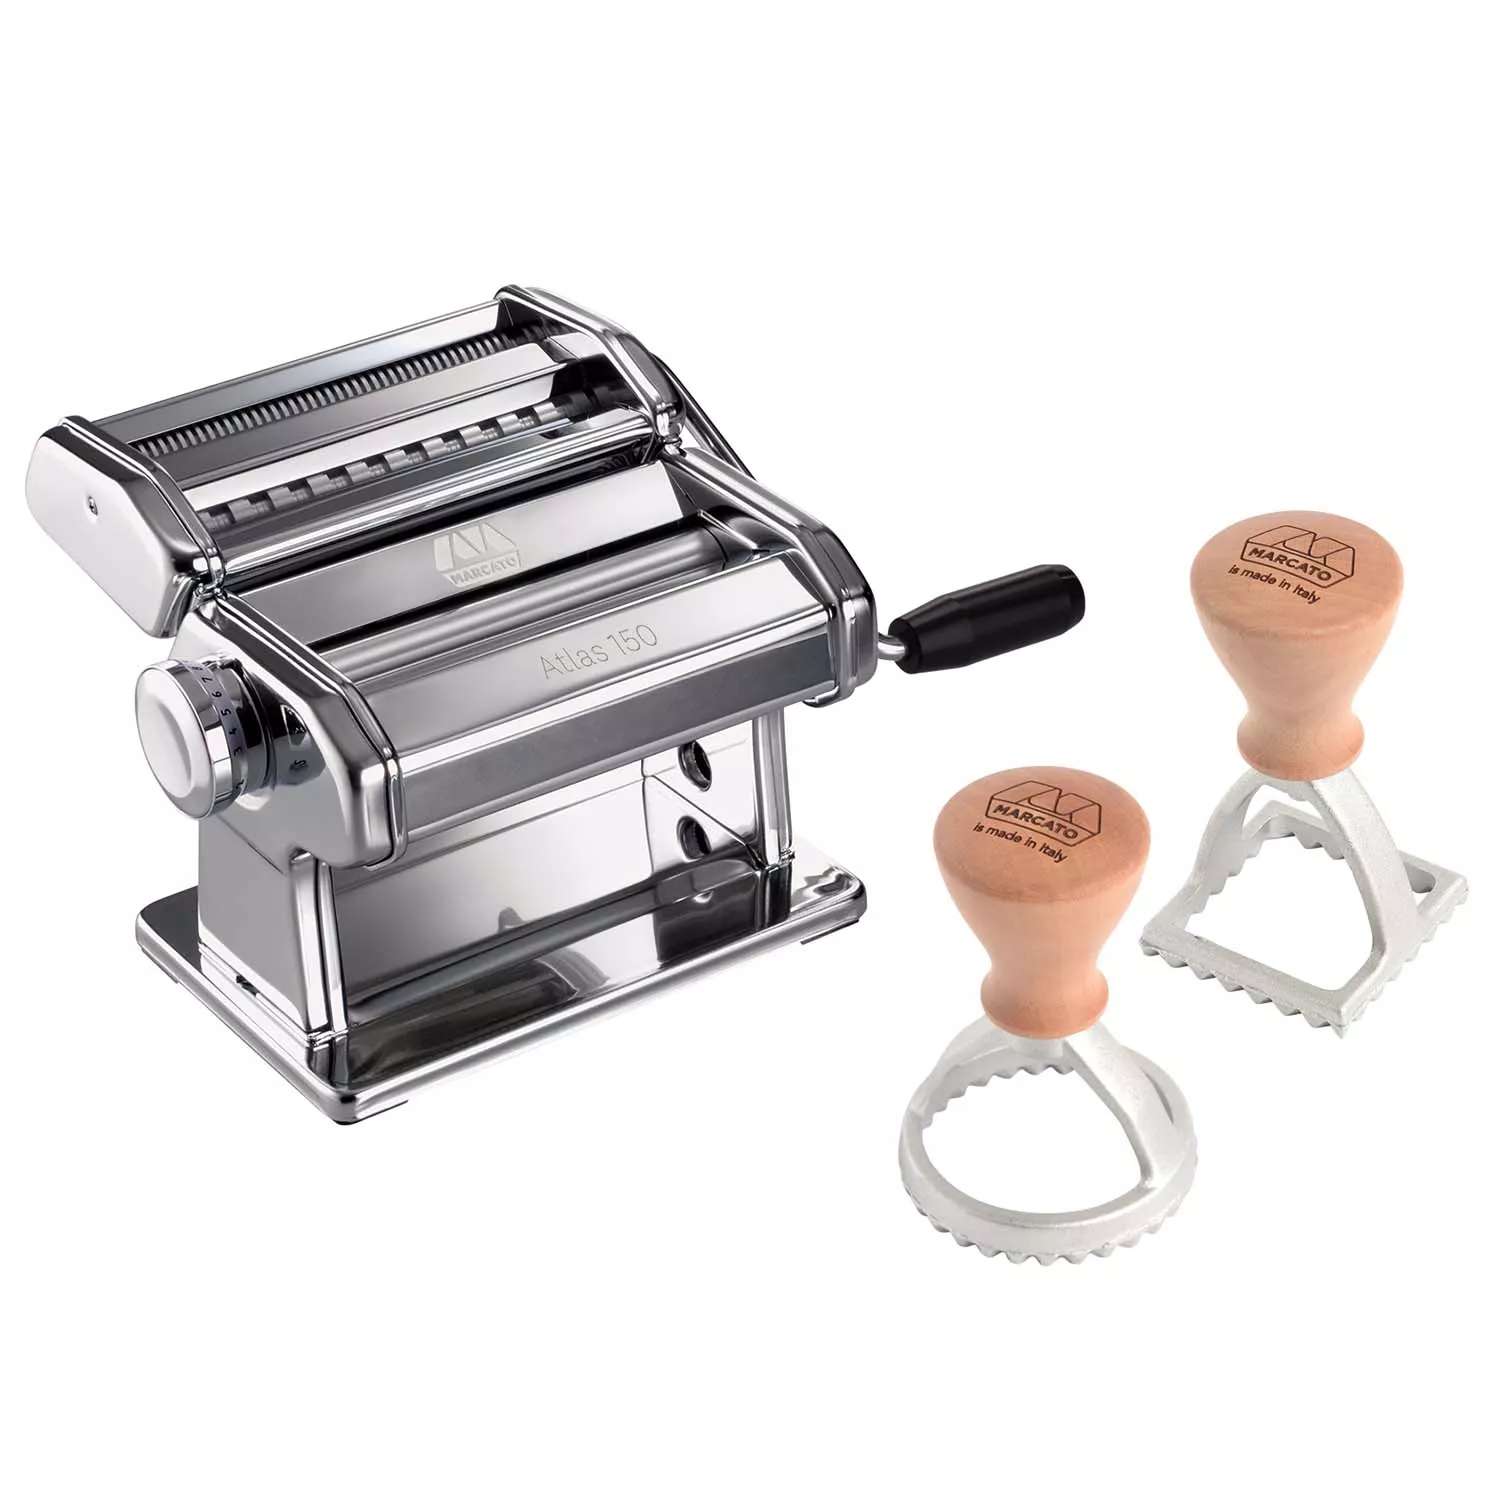 The Marcato Atlas 150 Is The Best Pasta Maker Ever Made